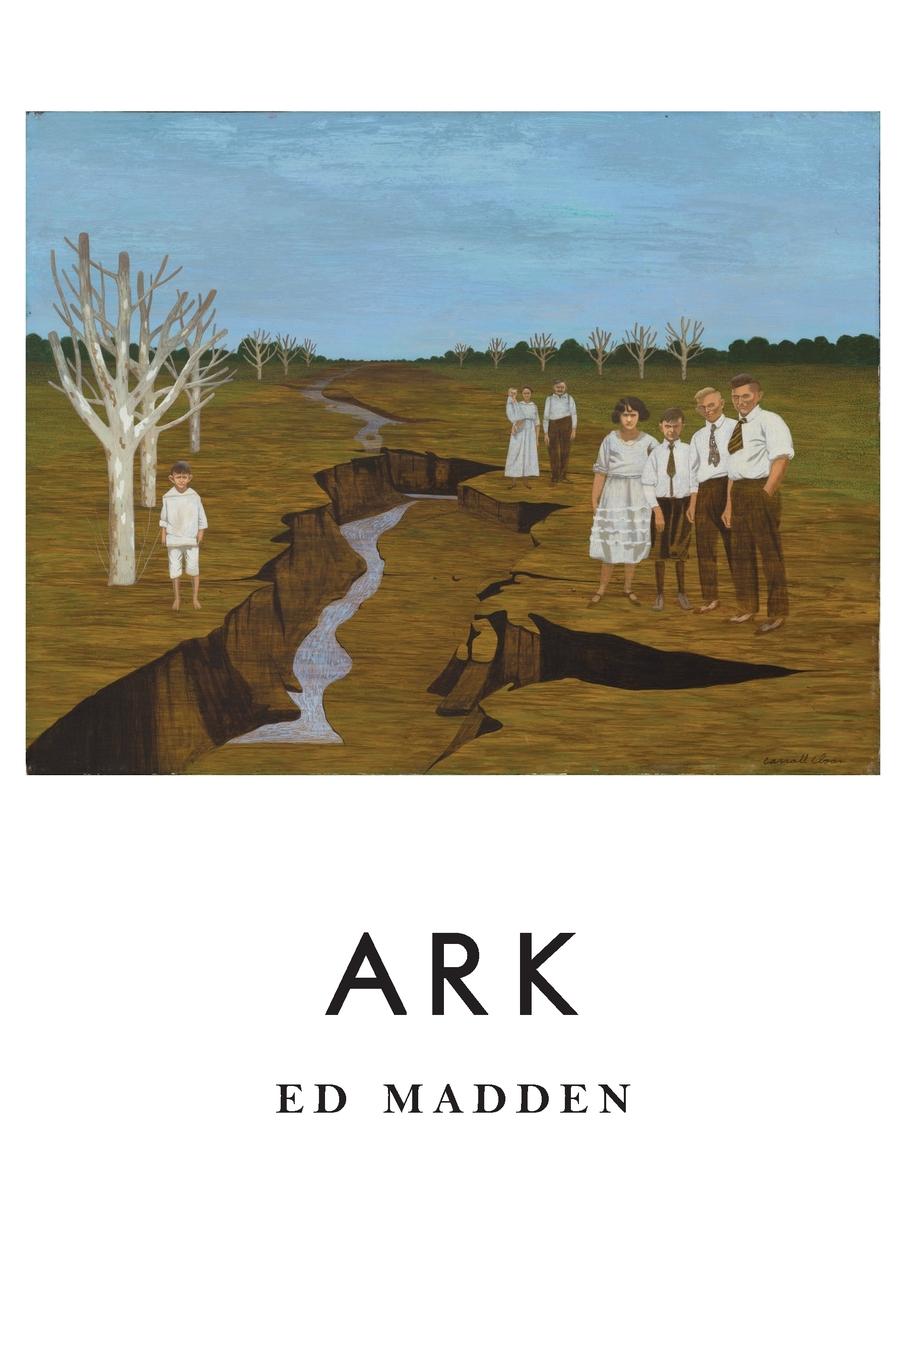 Image of Ark by Ed Madden